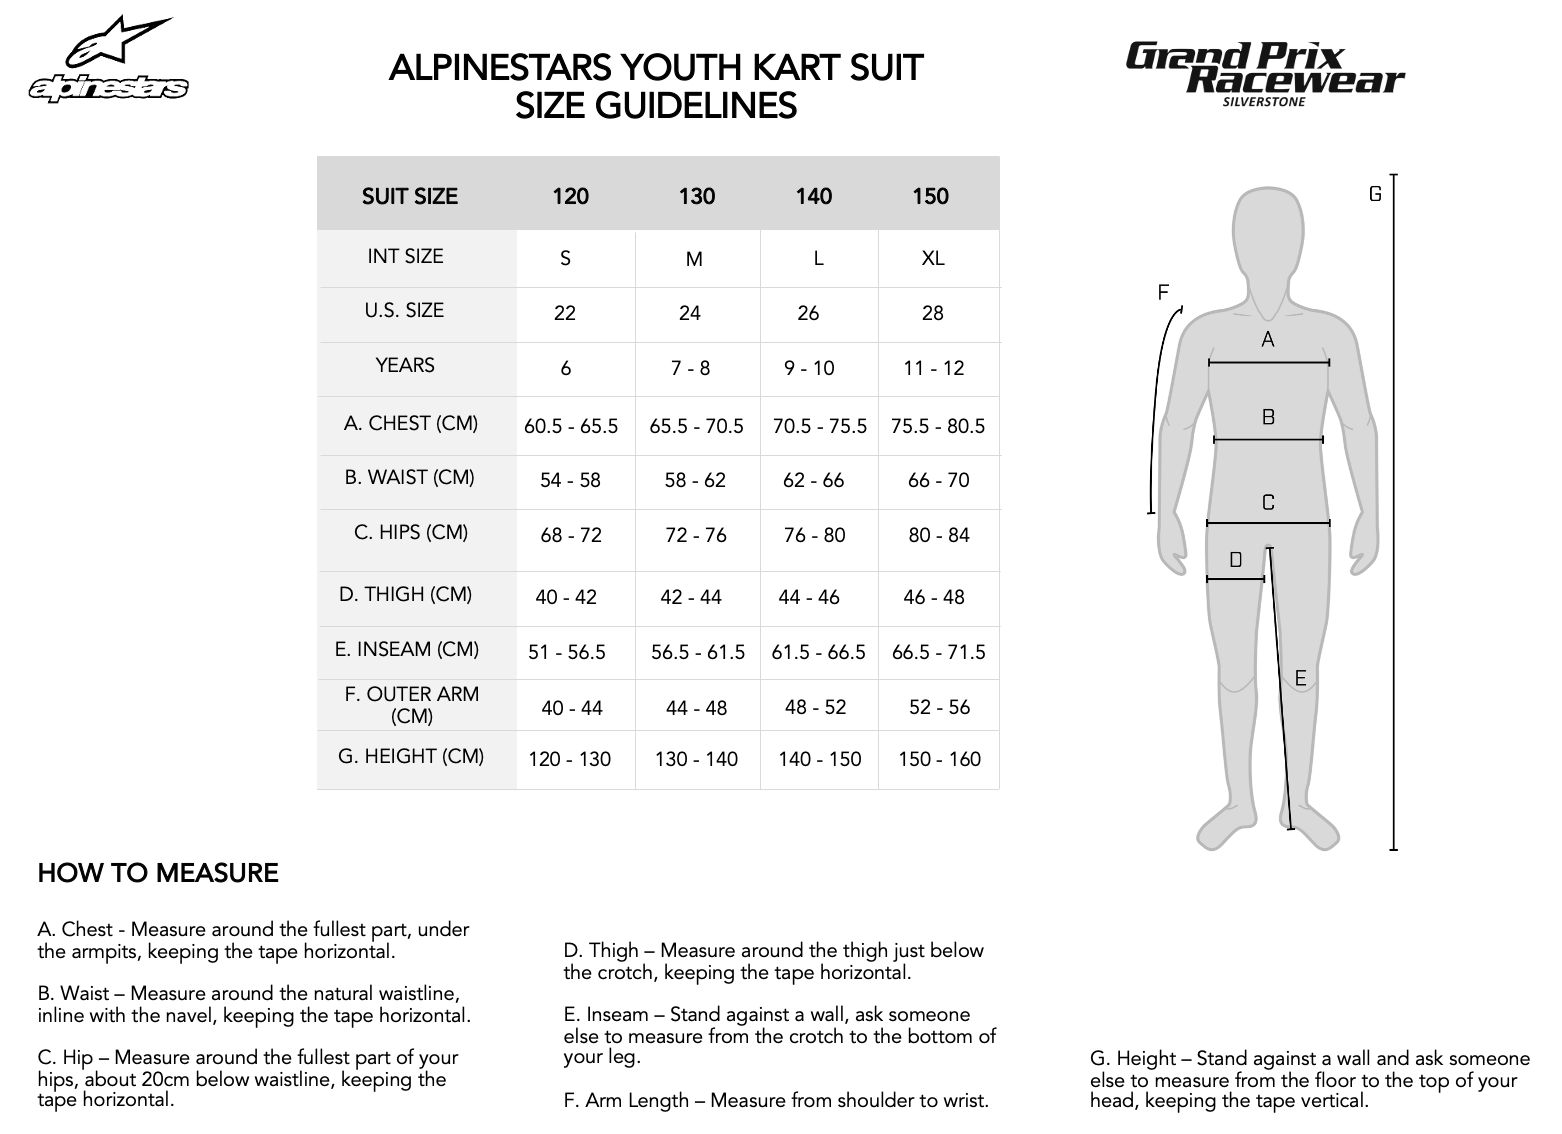 Size Guide for Alpinestars Youth Kart Suits available from www.gprdirect.com